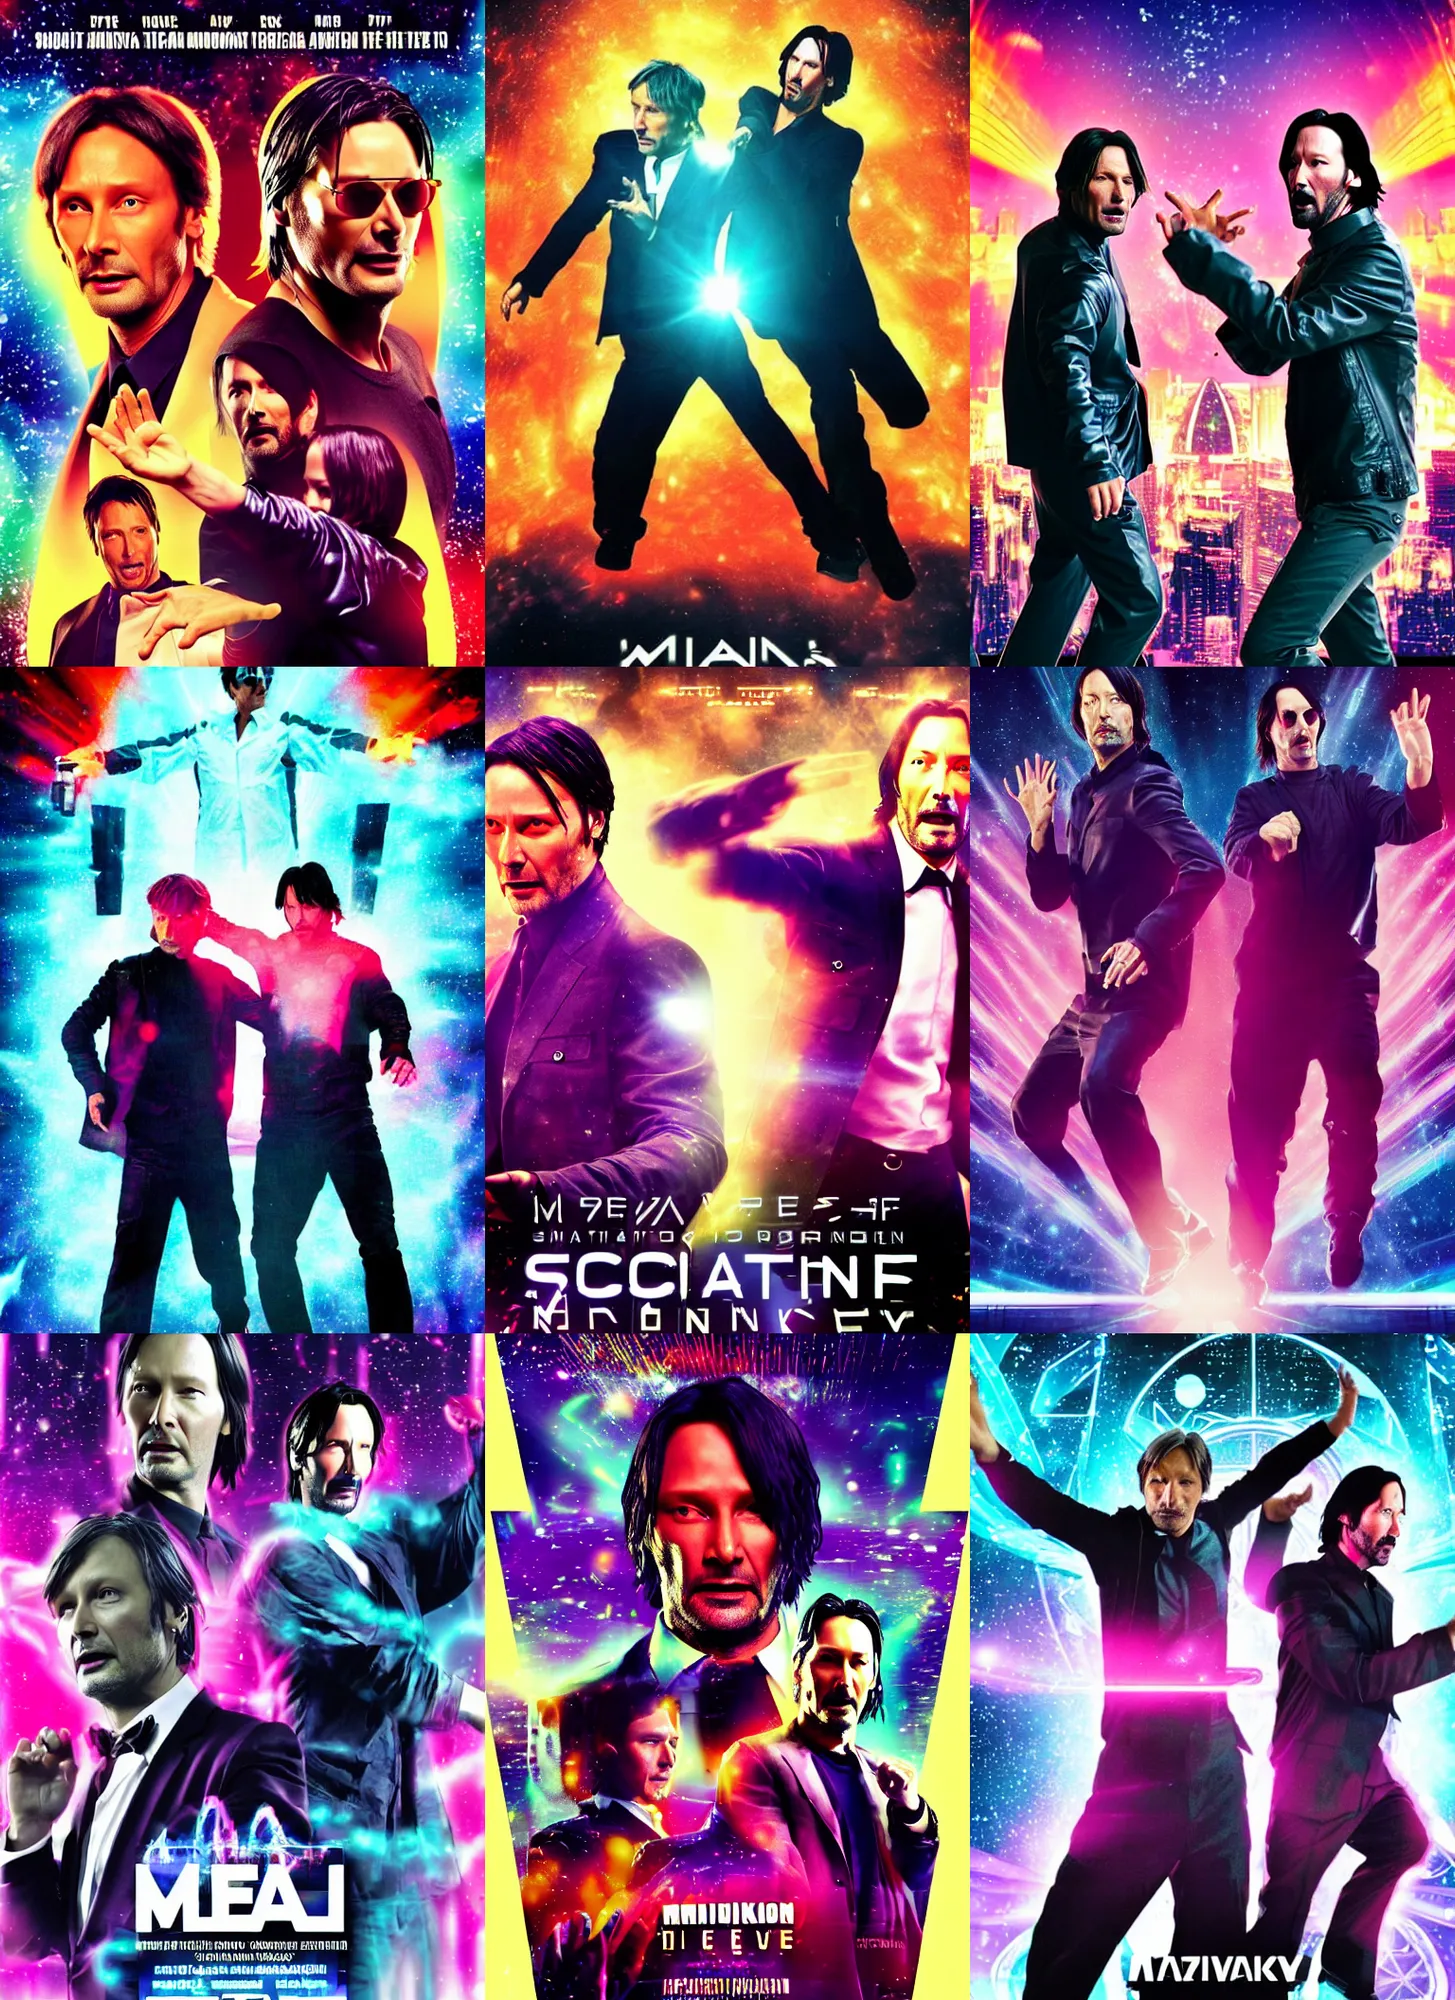 Prompt: sci-fi movie poster with Mads Mikkelsen and Keanu Reeves doing a choreography danceoff, vaporwave style